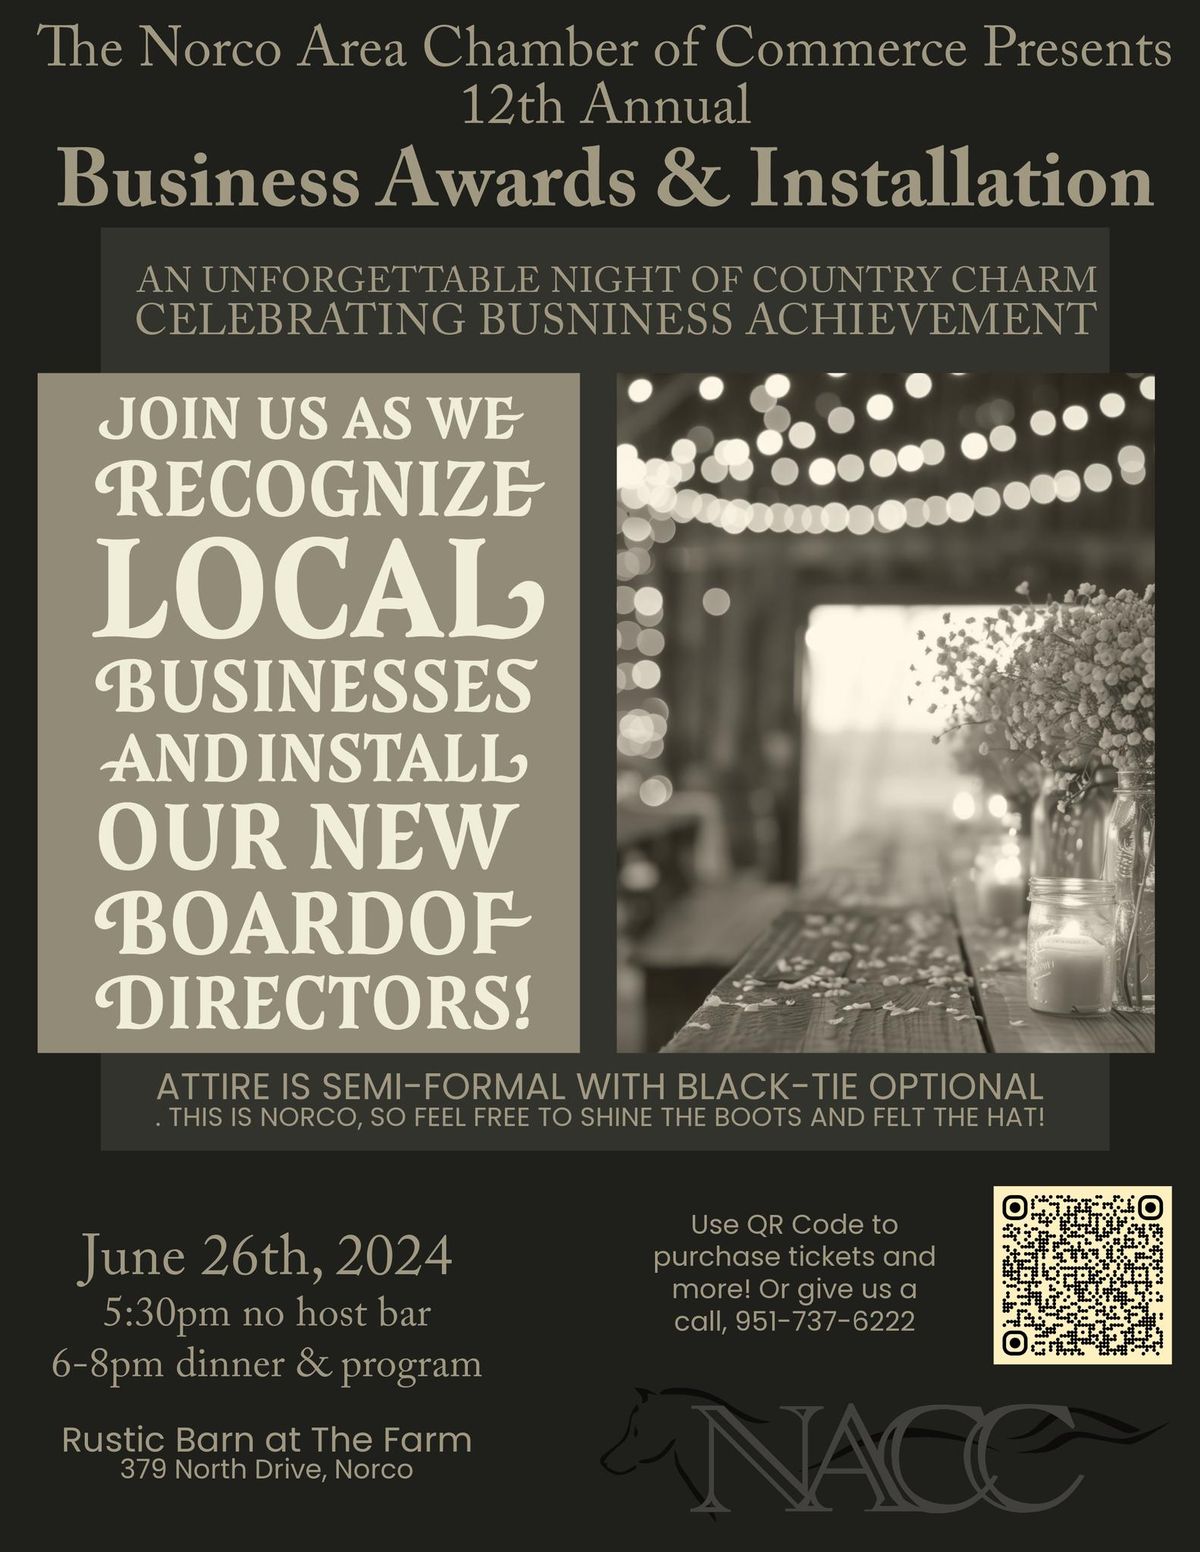 NACC's 12th Annual Business Awards & Installation  